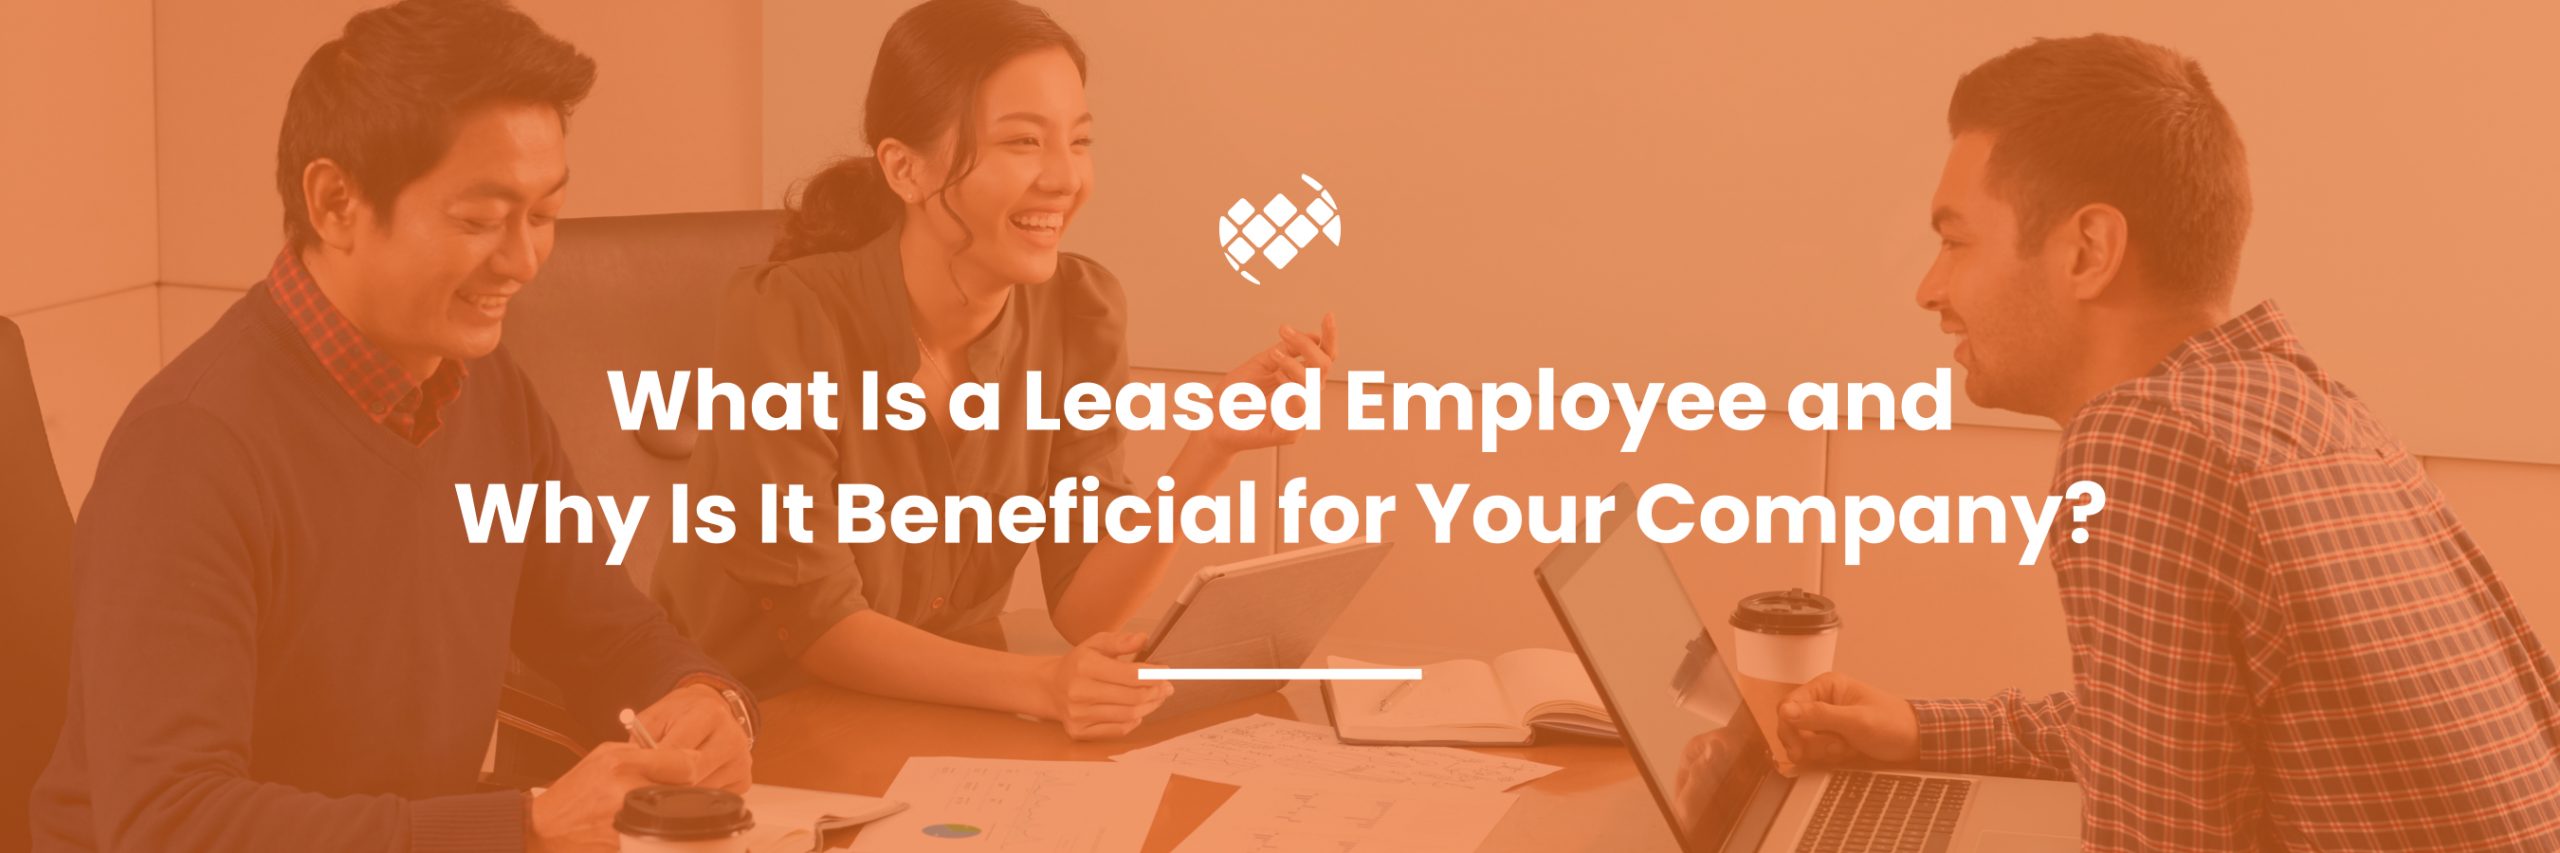 What is a leased employee?